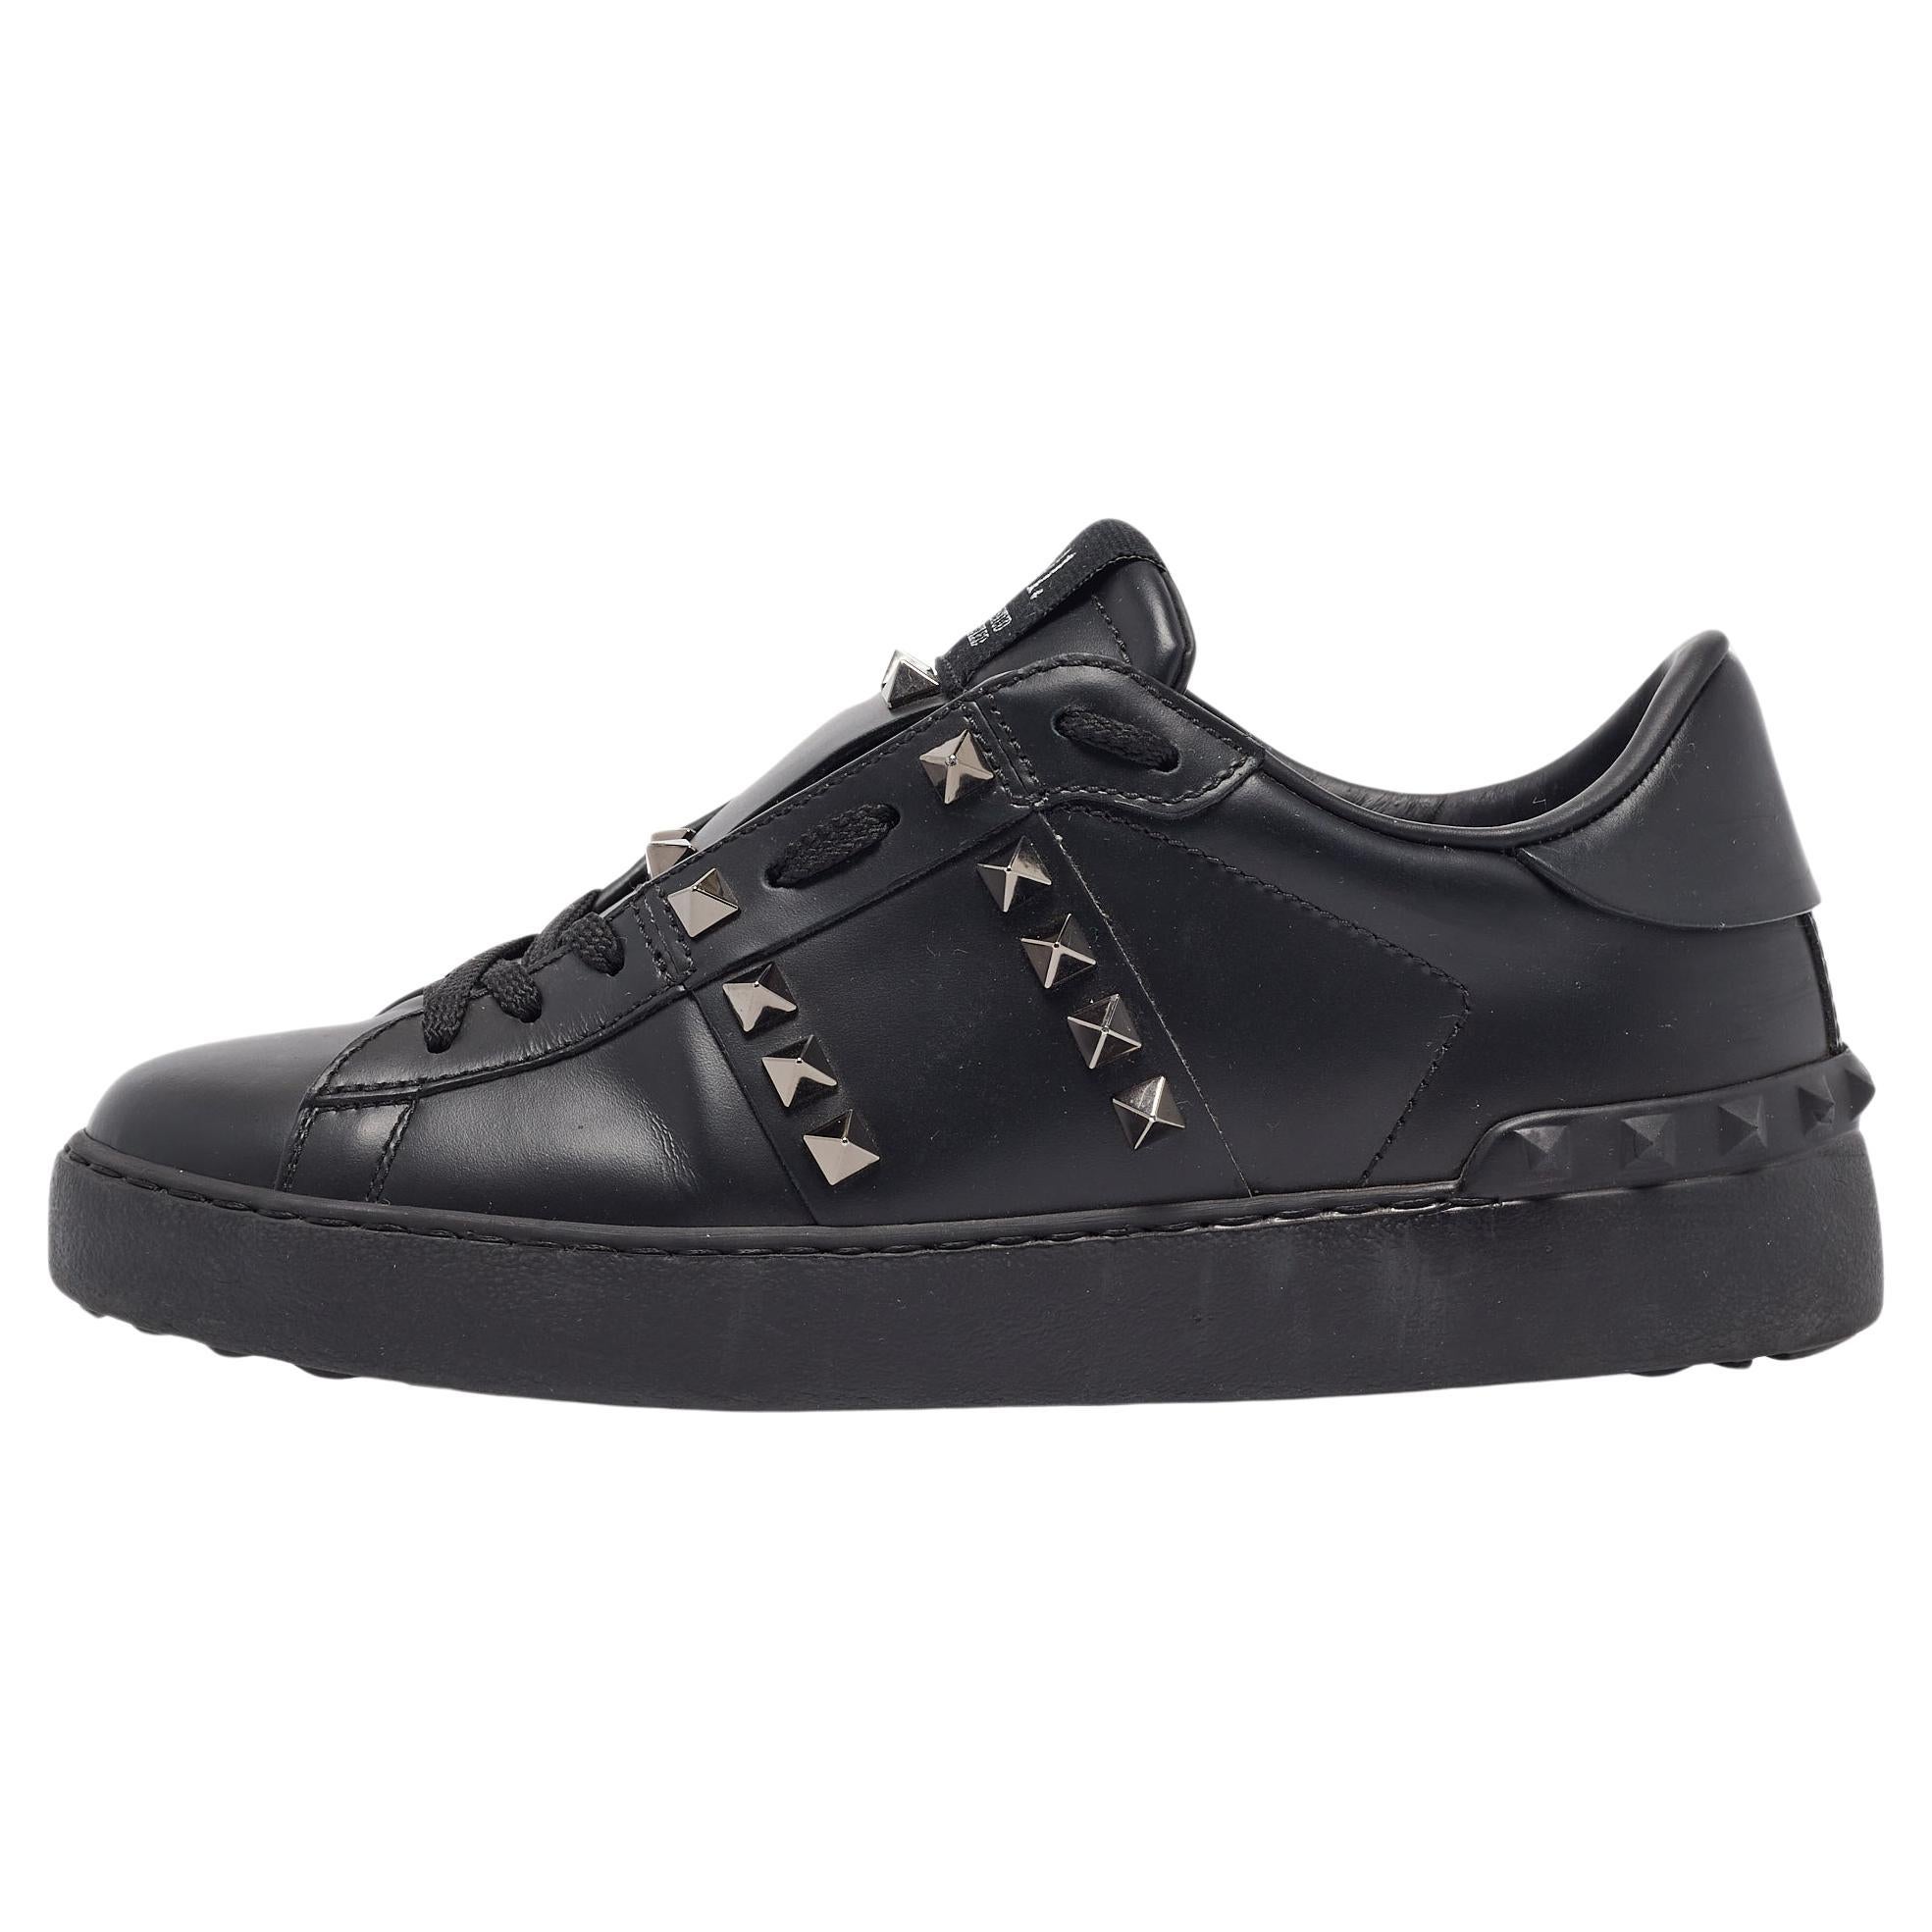 Valentino Black Leather Rockstud Low Top Sneakers Size 36.5 For Sale